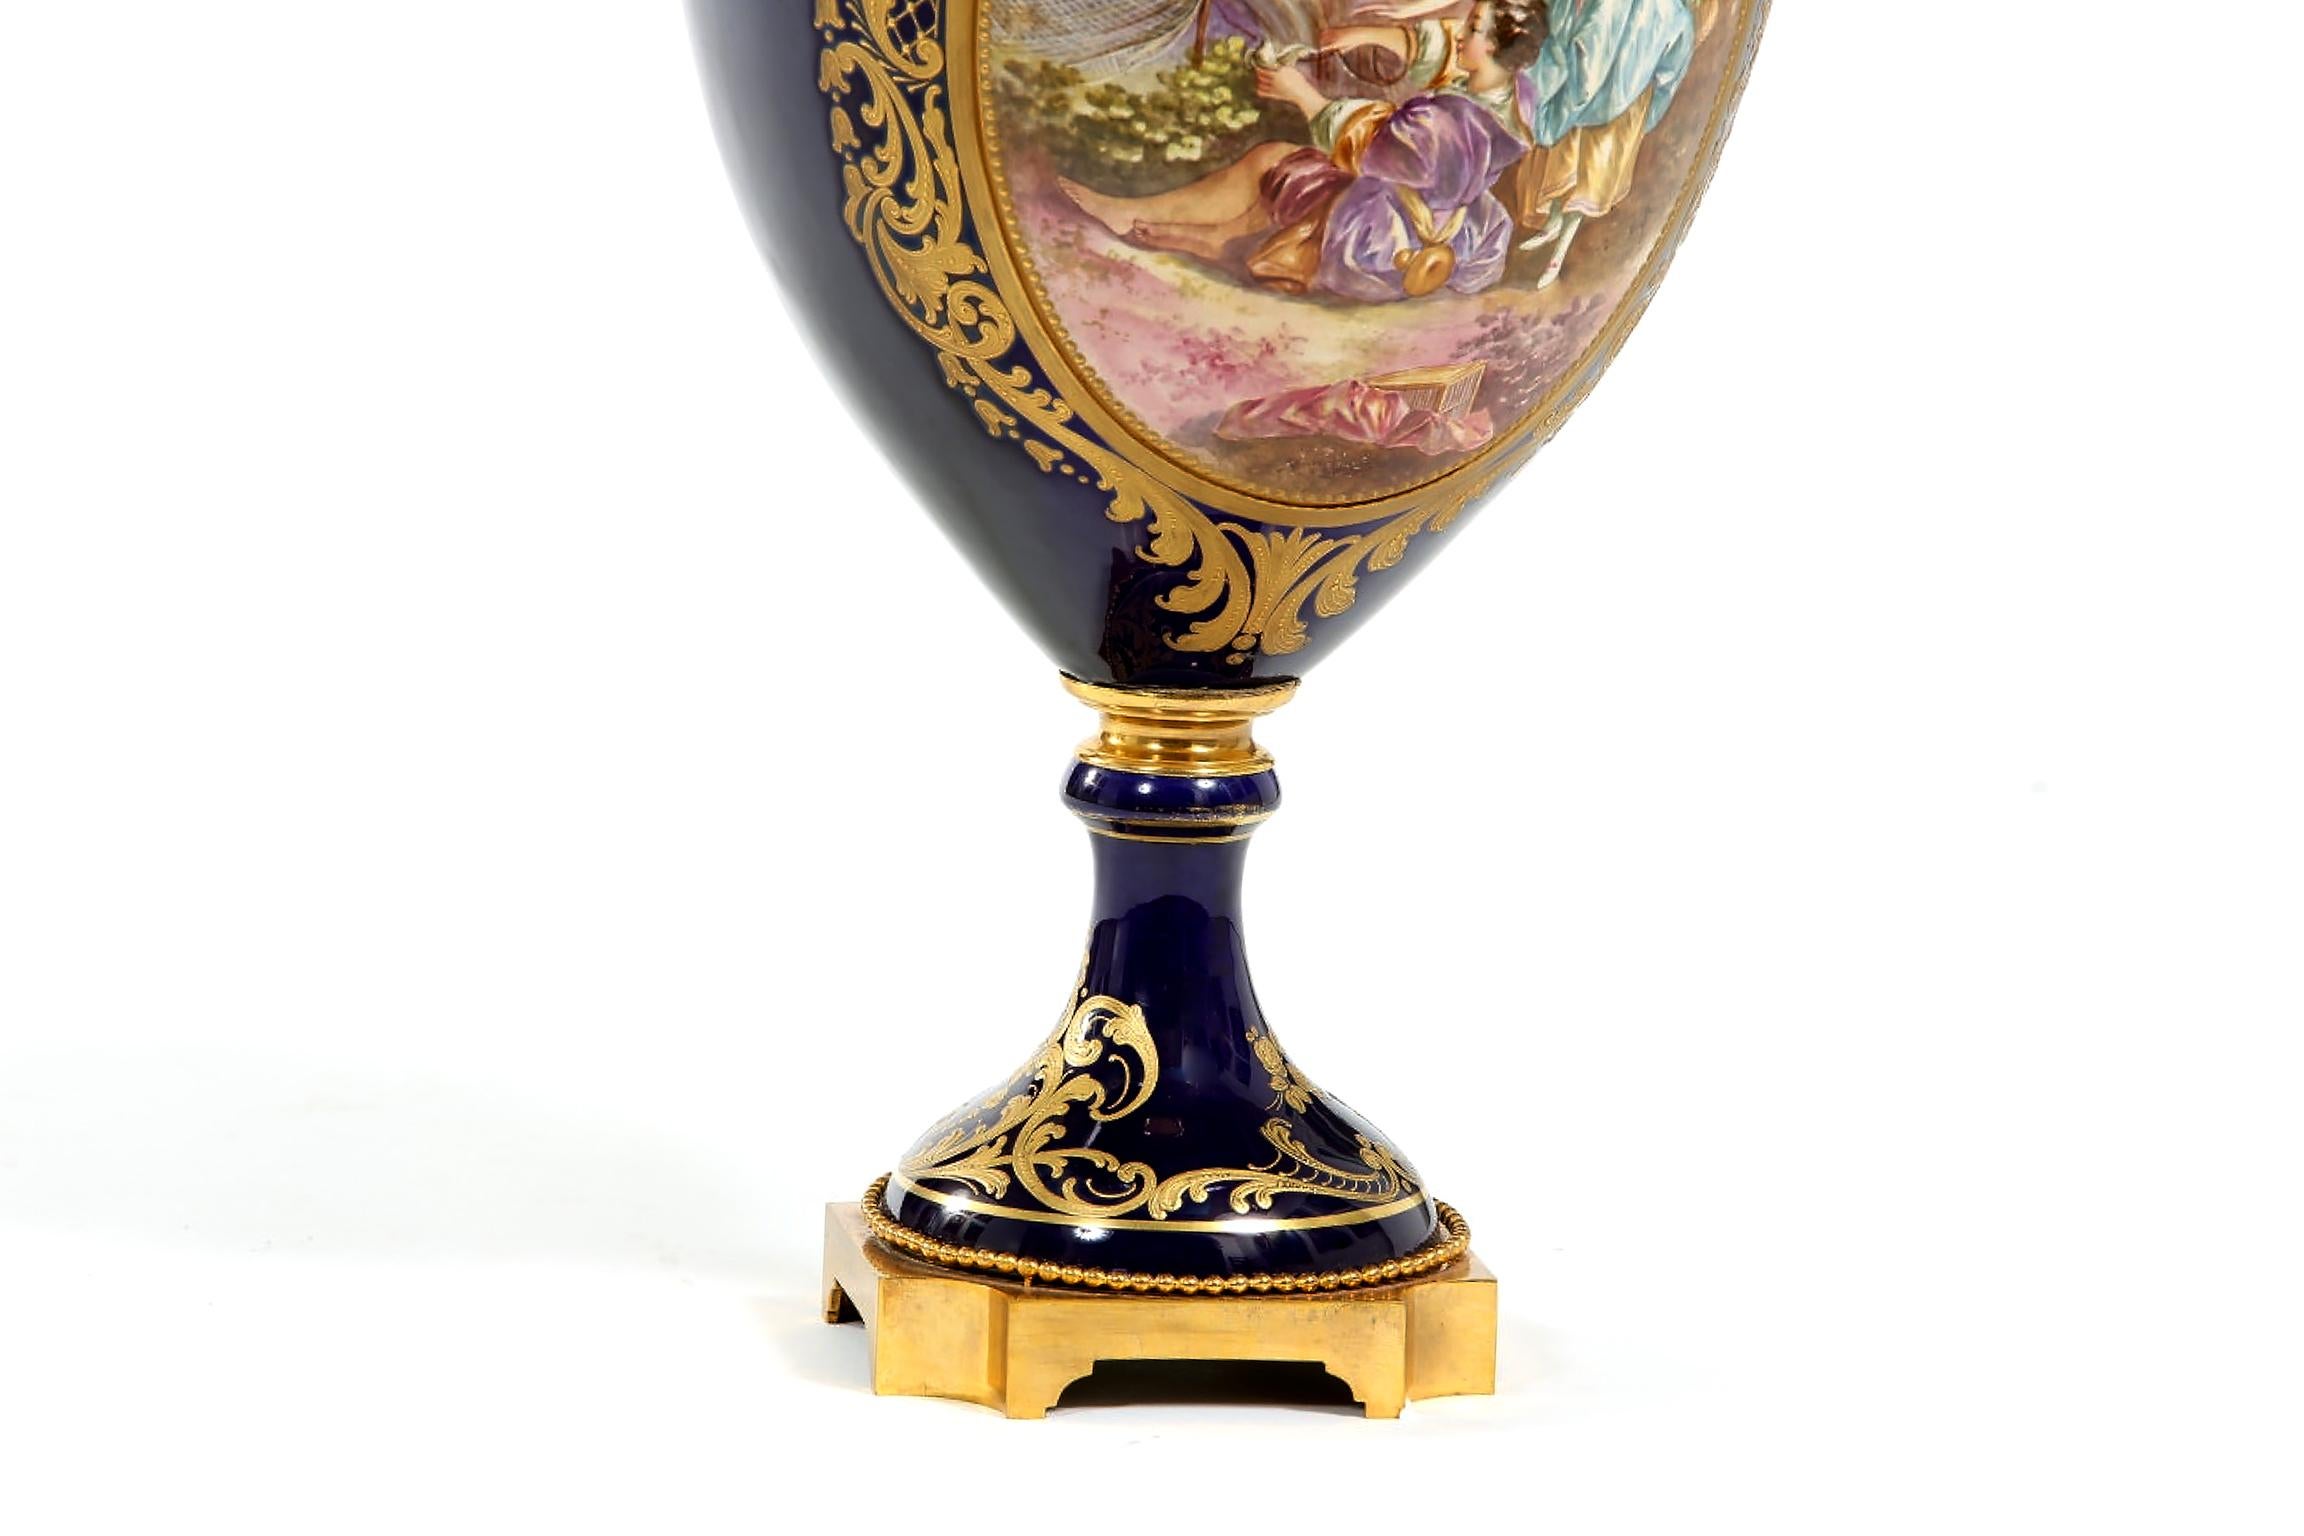 Hand-Painted 19th Century Sevres Porcelain Covered Decorative Urn